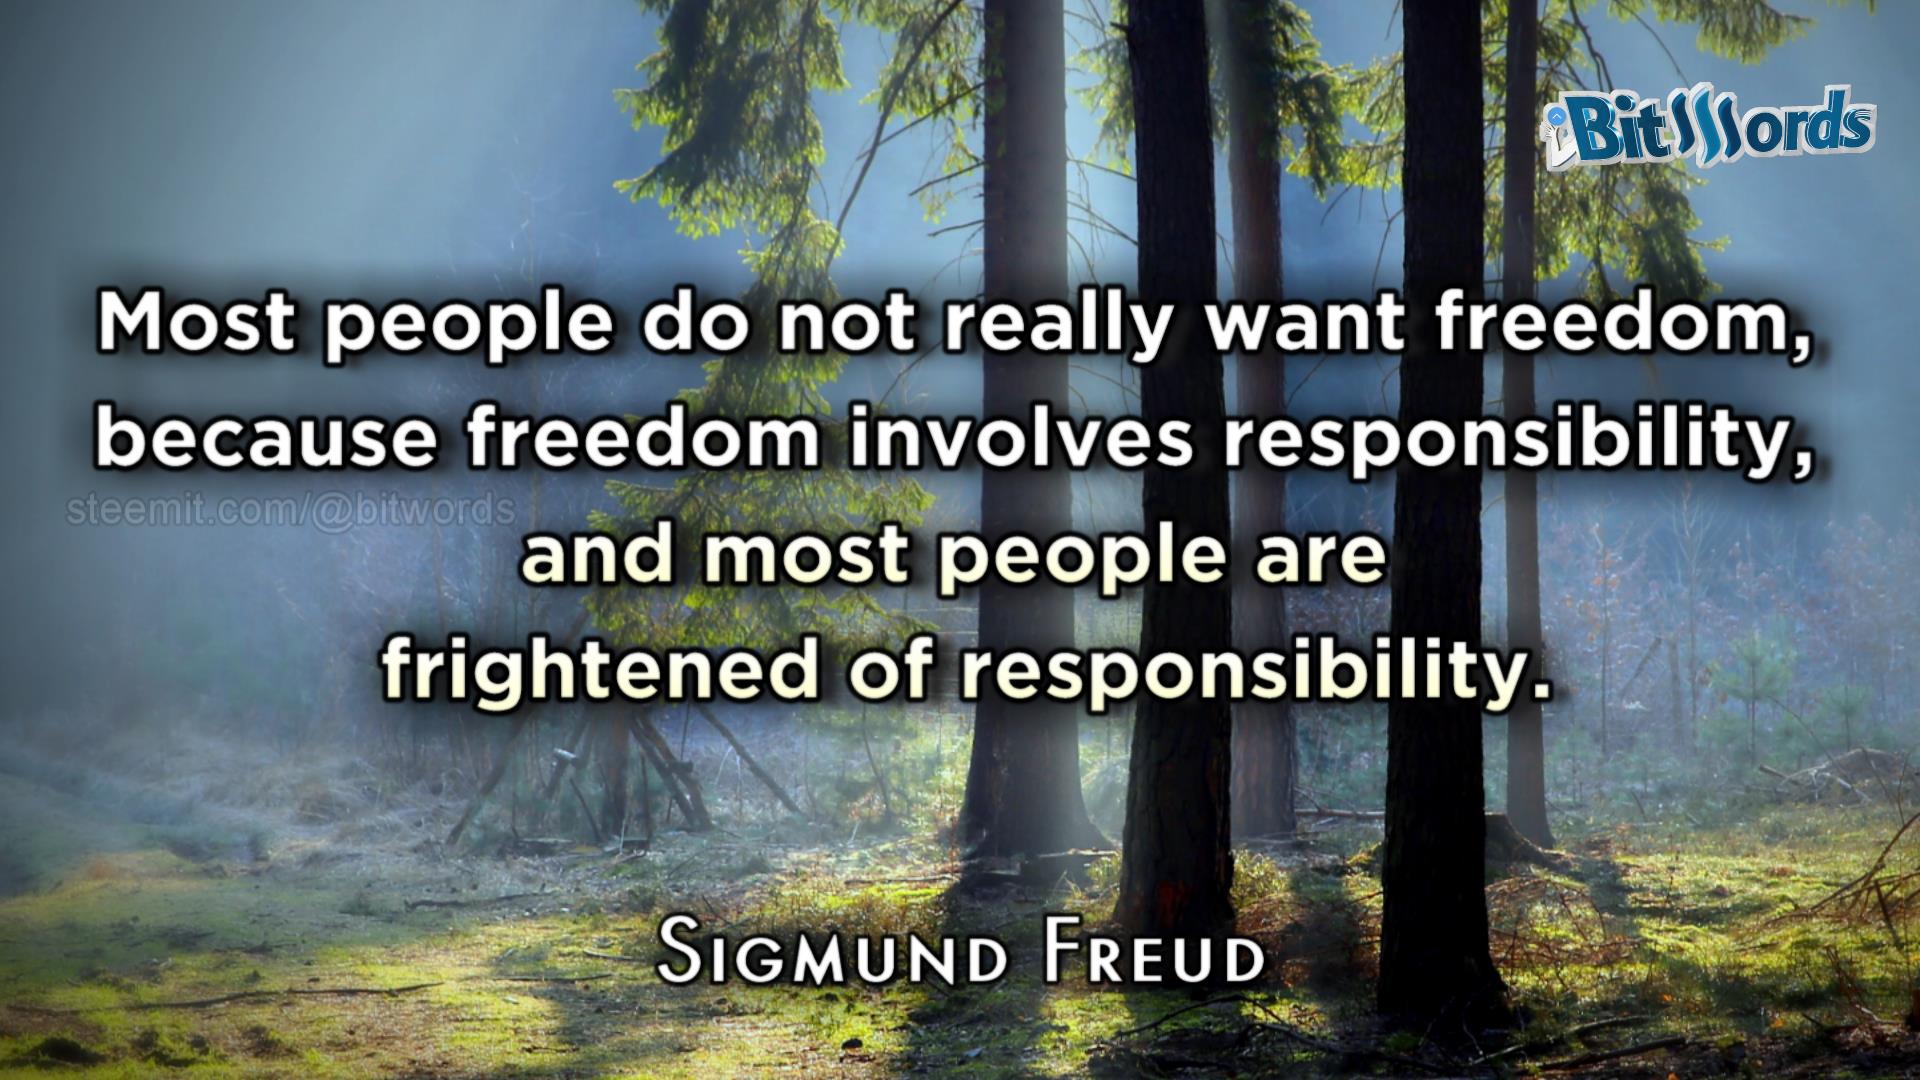 bitwords steemit quote of the day sigmund freud most people do not really want freedom beacuse freedom involves responsability and most people are frigtnened of responsability.jpg